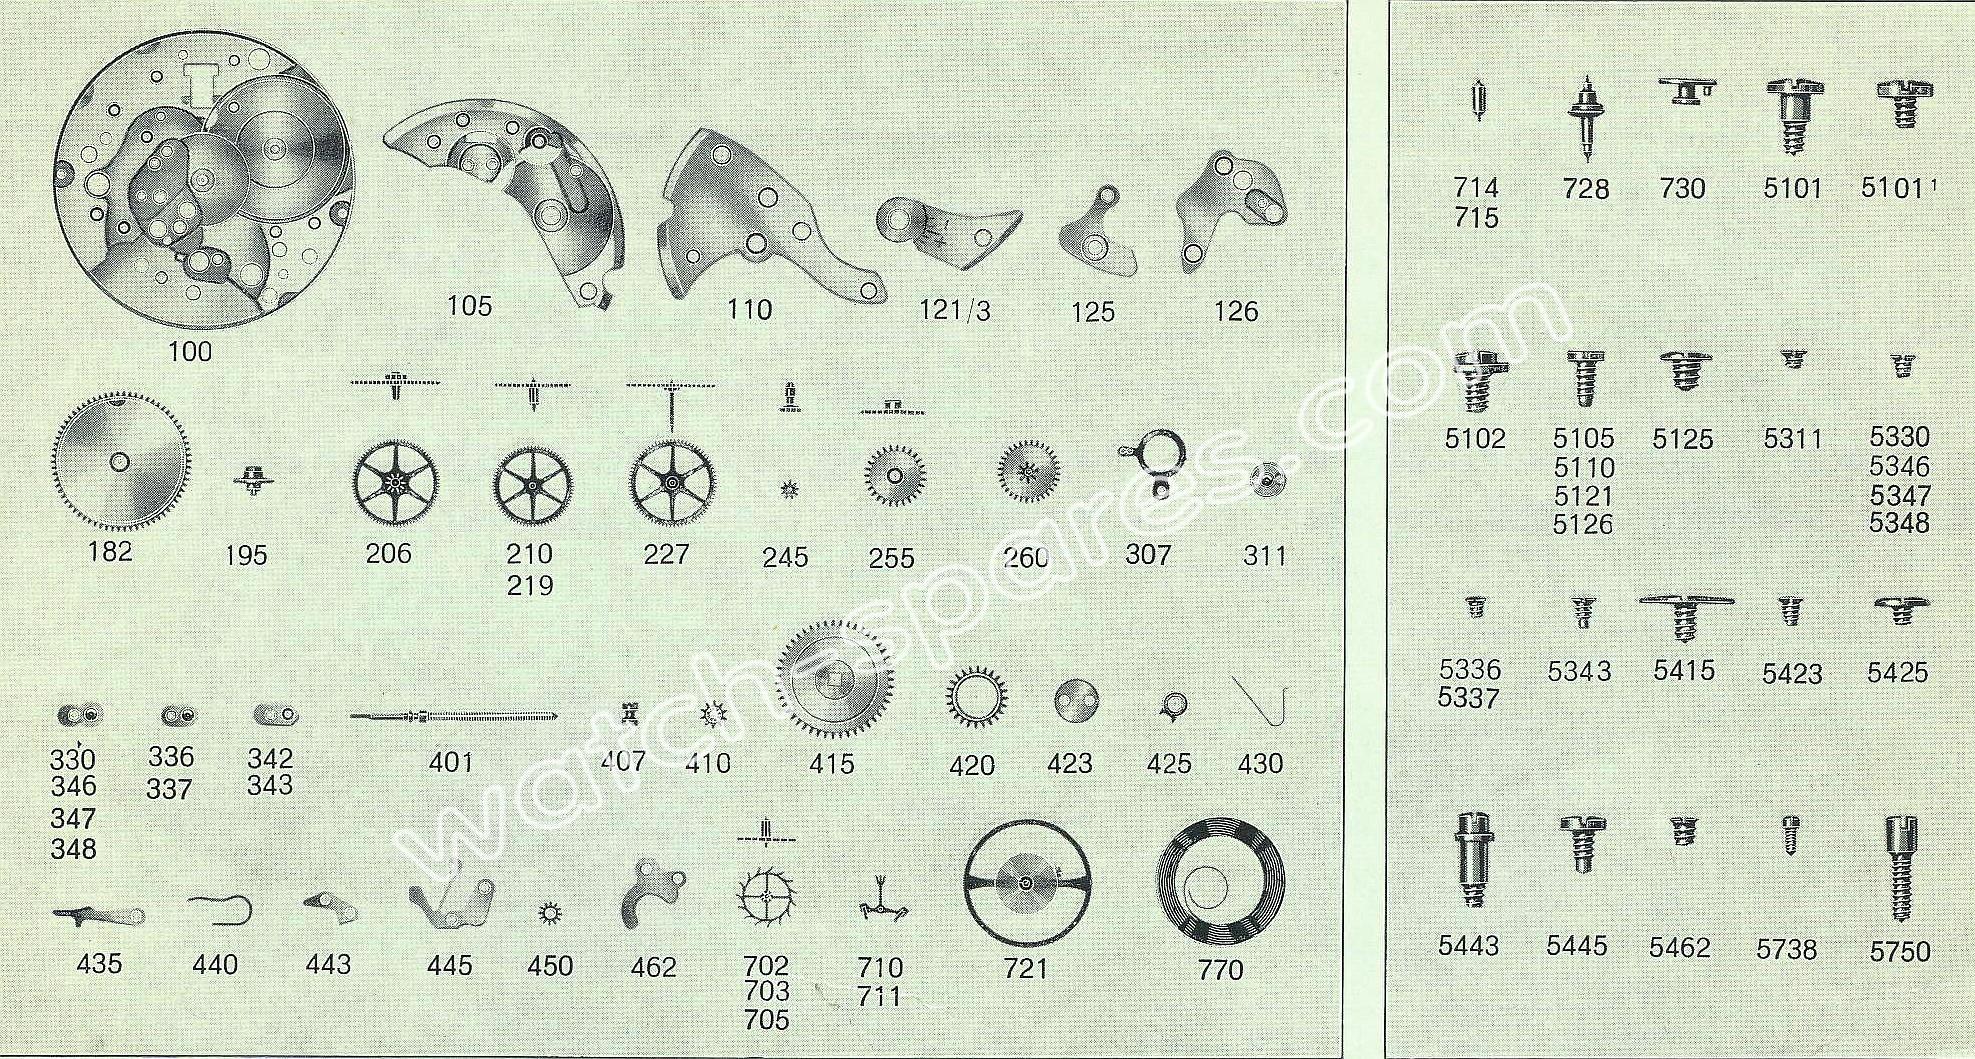 FHF Font 665.9 watch spare parts